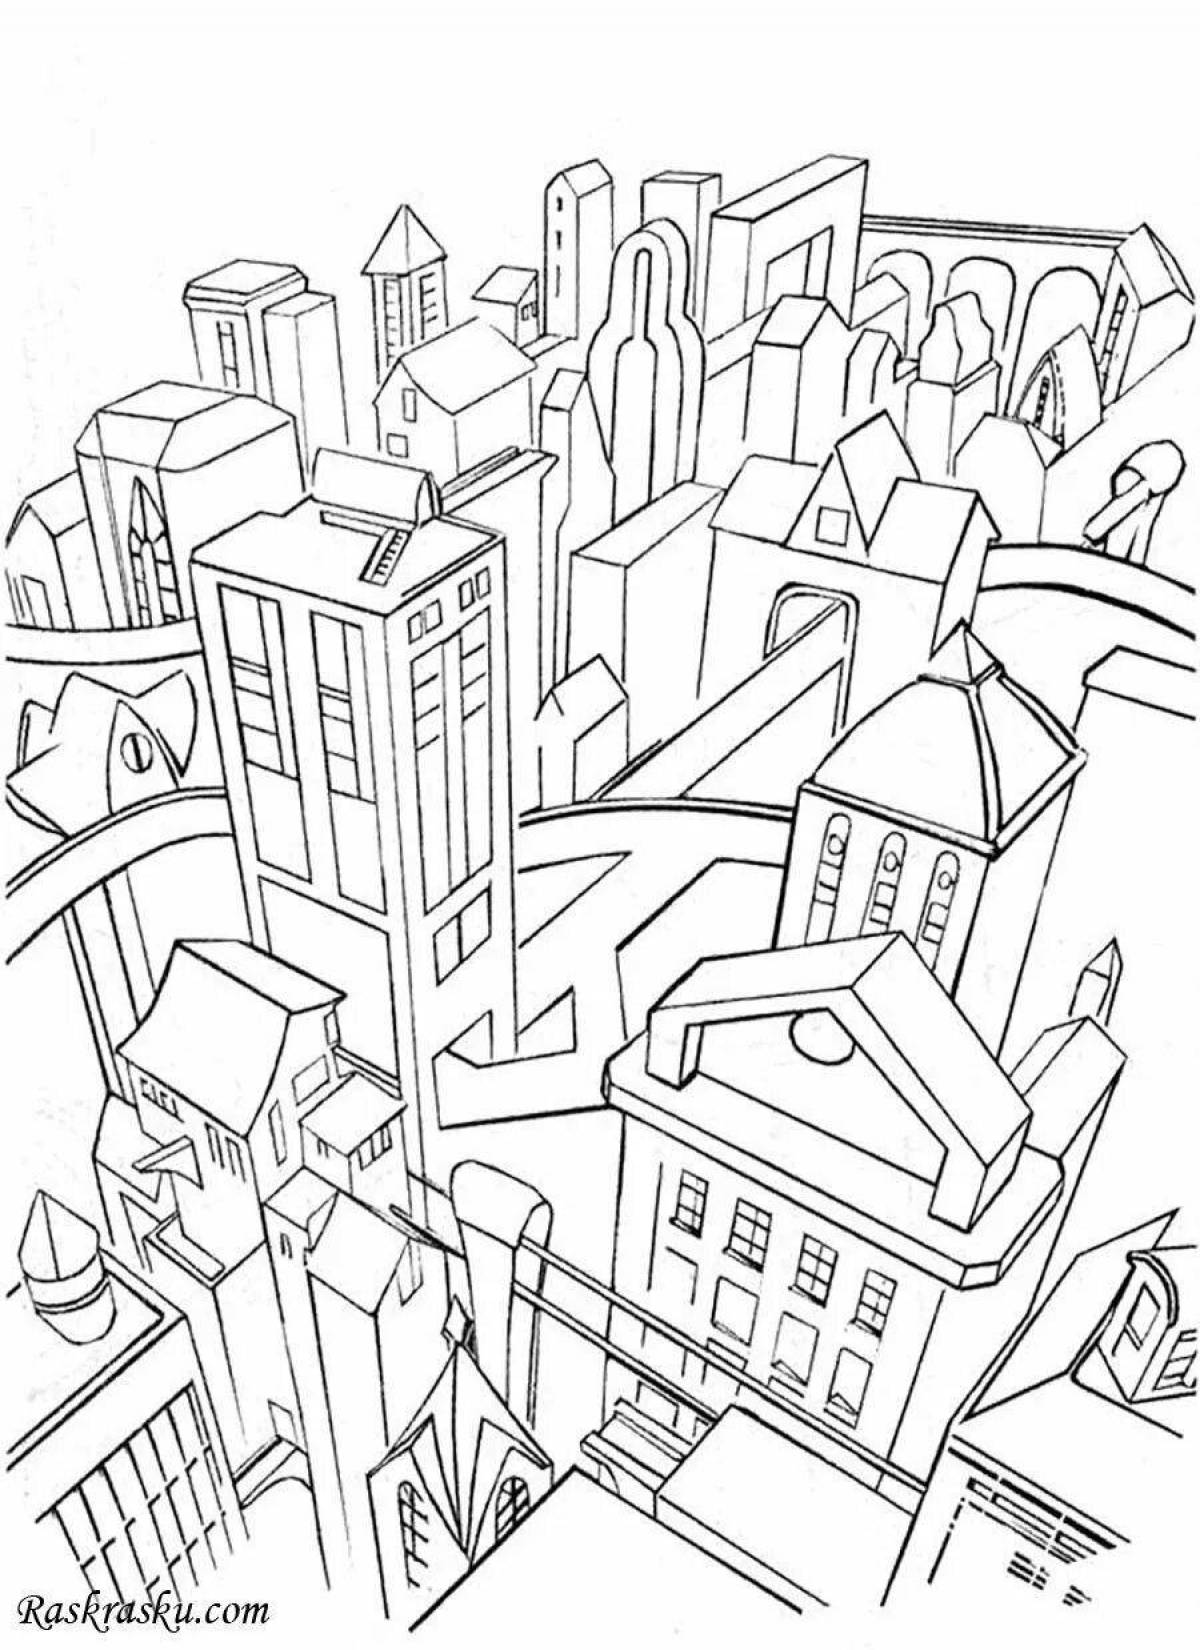 Great coloring book city of my dreams